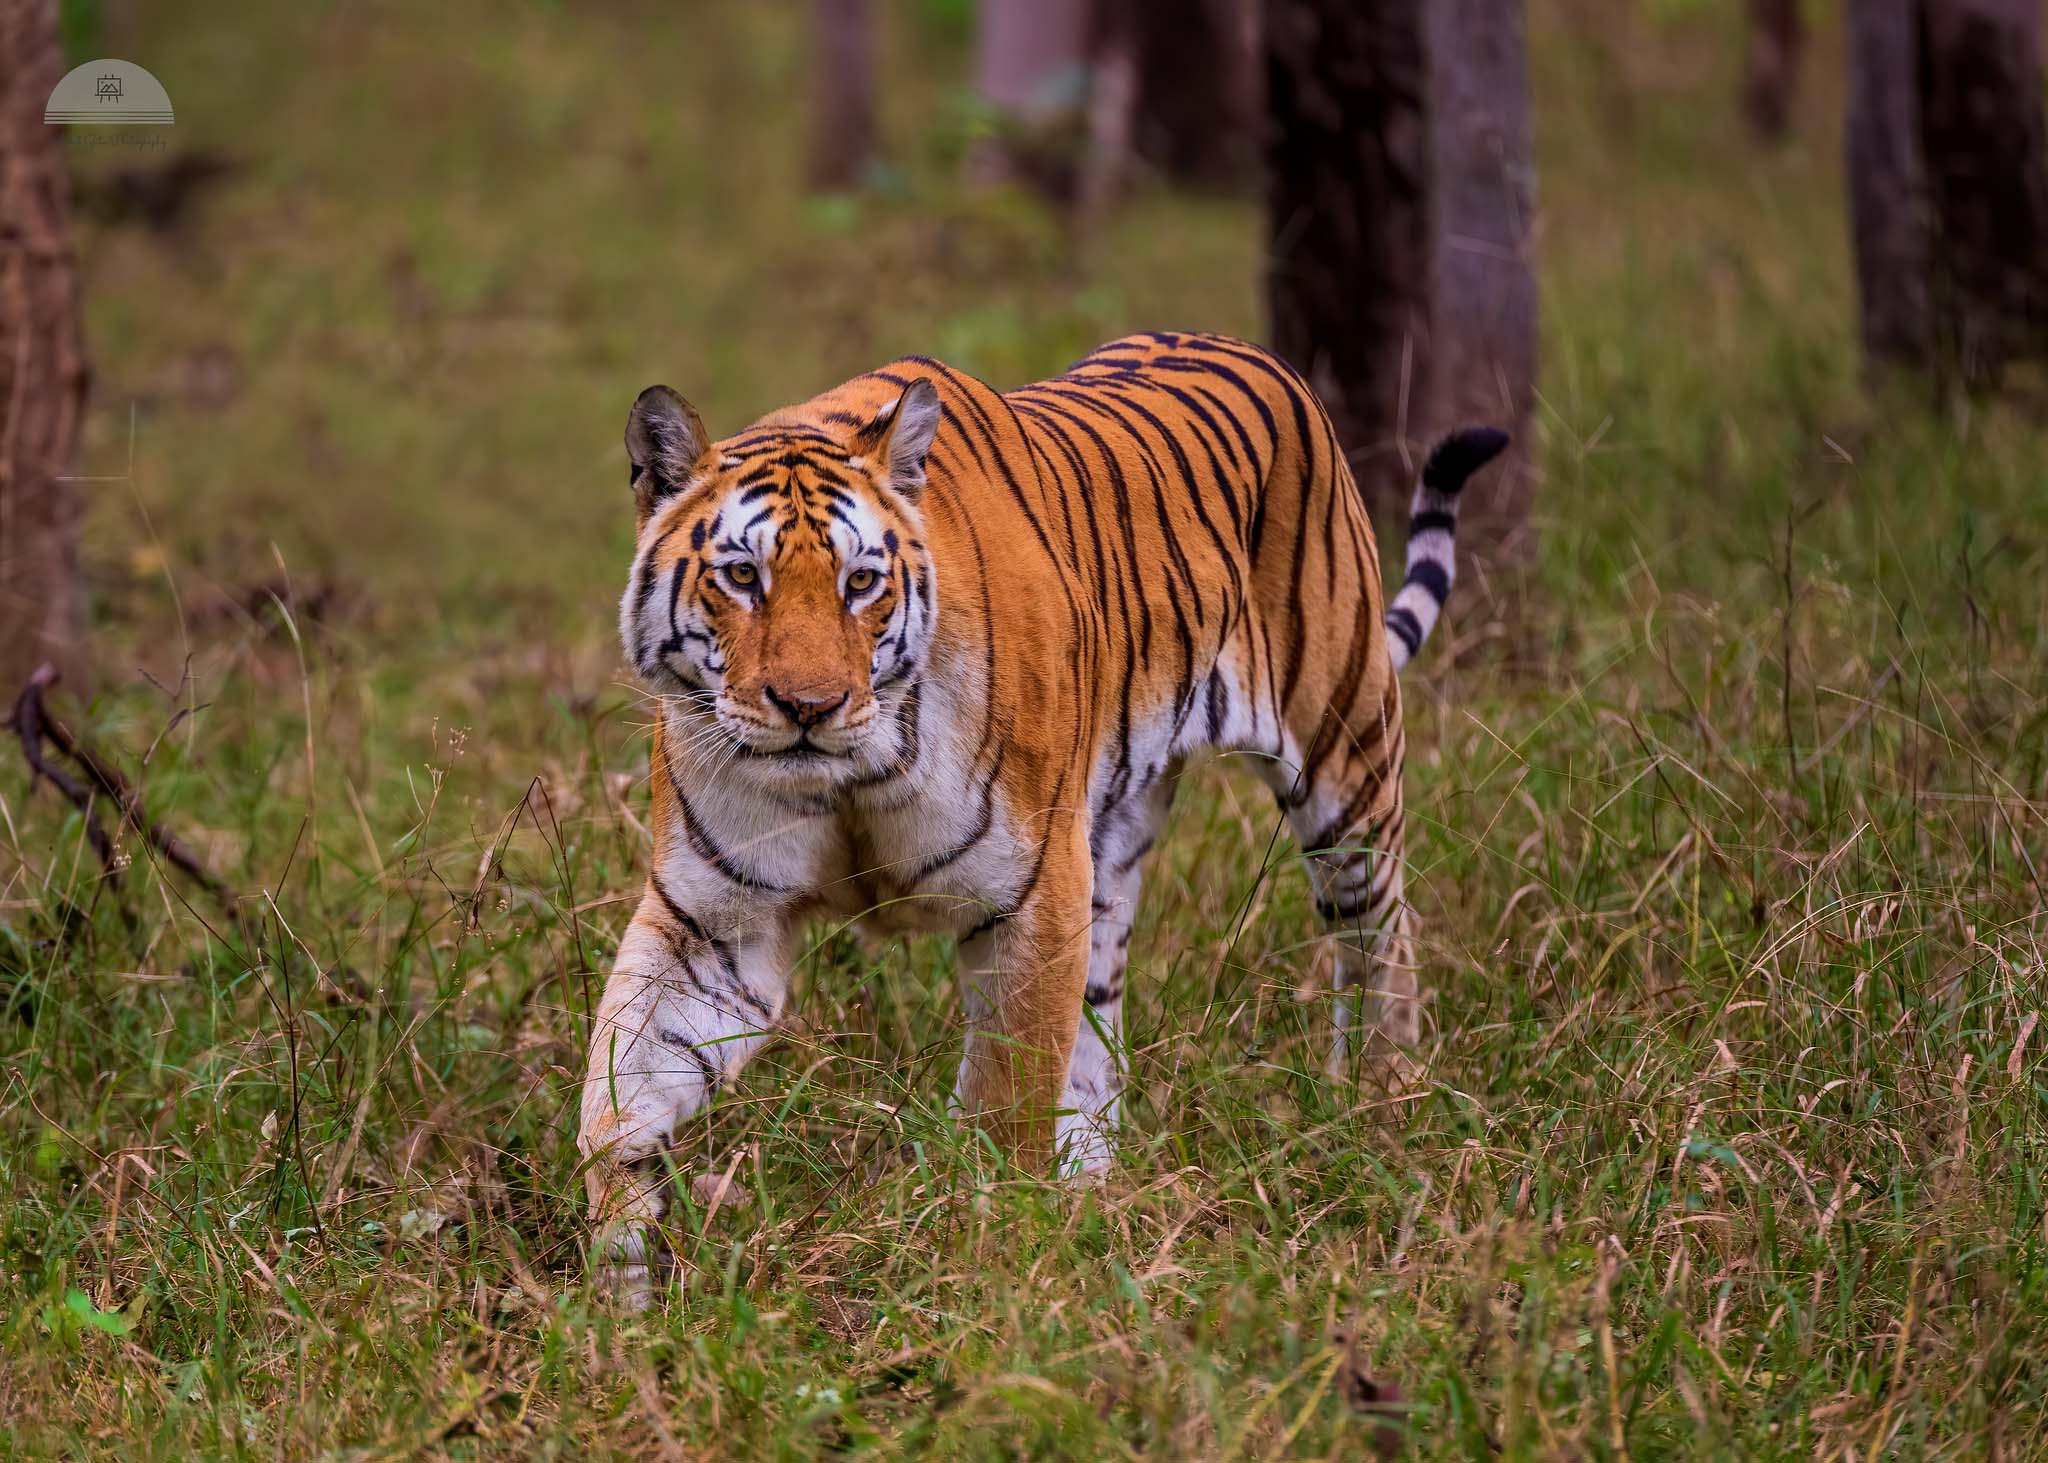 A tiger walking in the grass